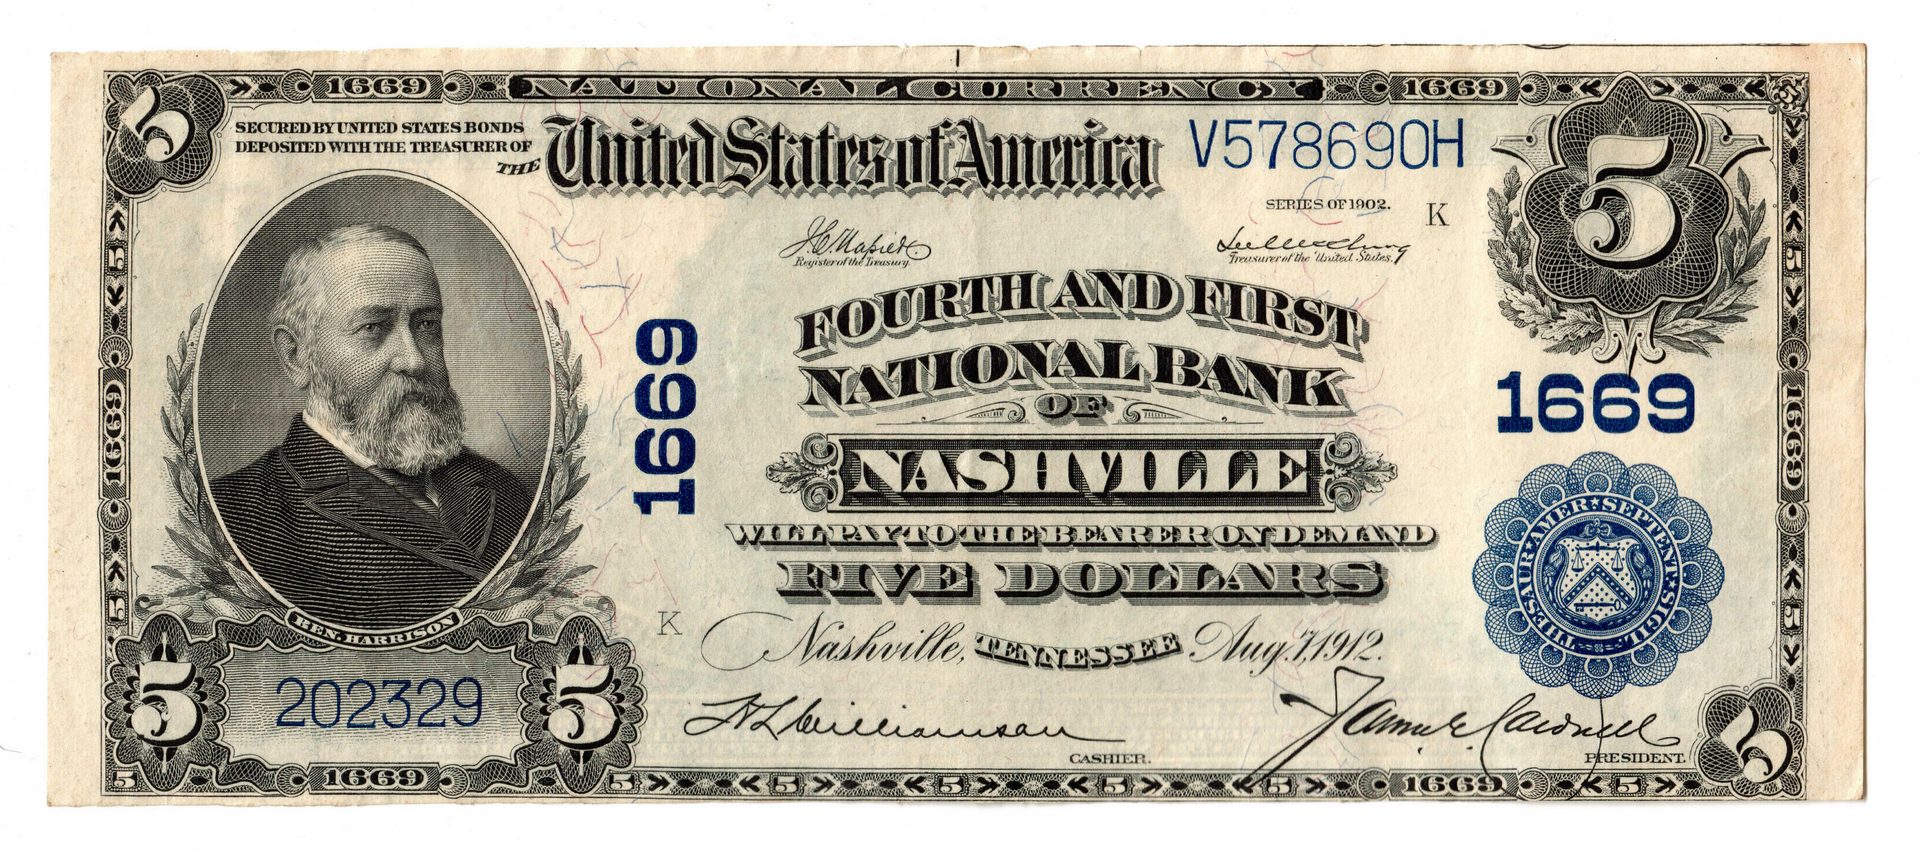 Lot 69: 1902 $5 Fourth and First National Bank, Nashville